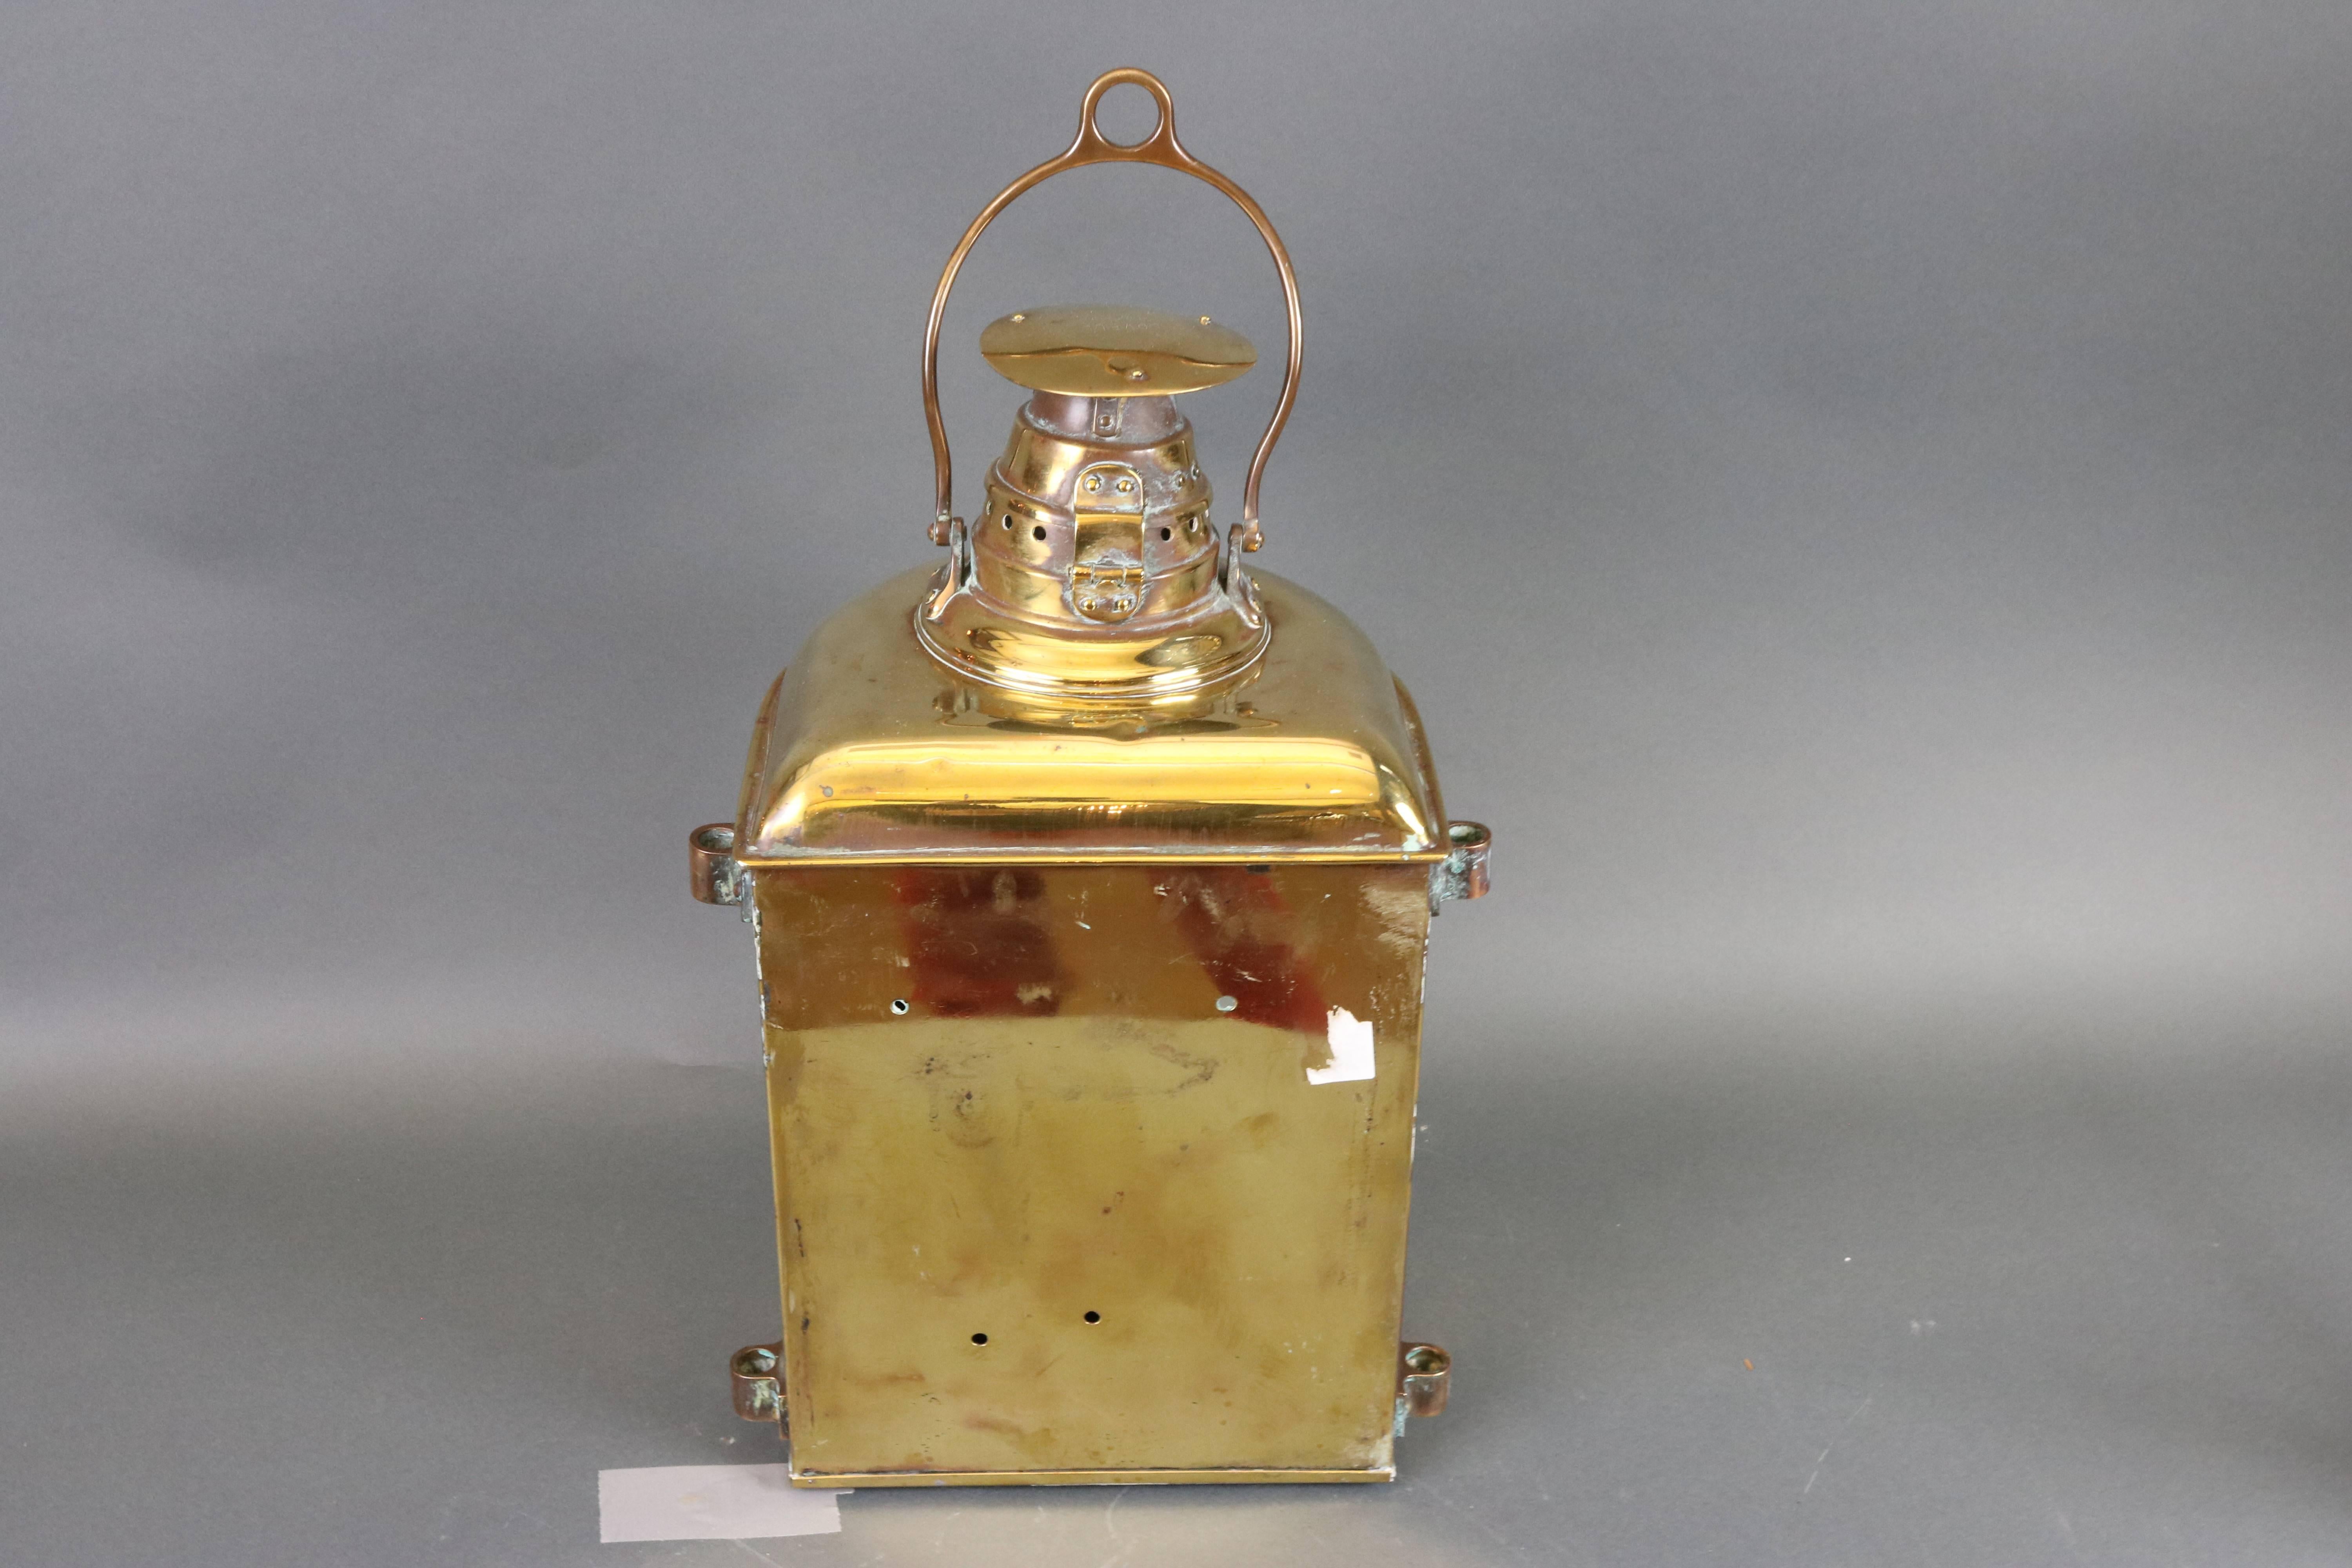 Ship's masthead lantern by Lovell. With corning fresnel glass lens, vented top, carry handle. Dimensions: 13